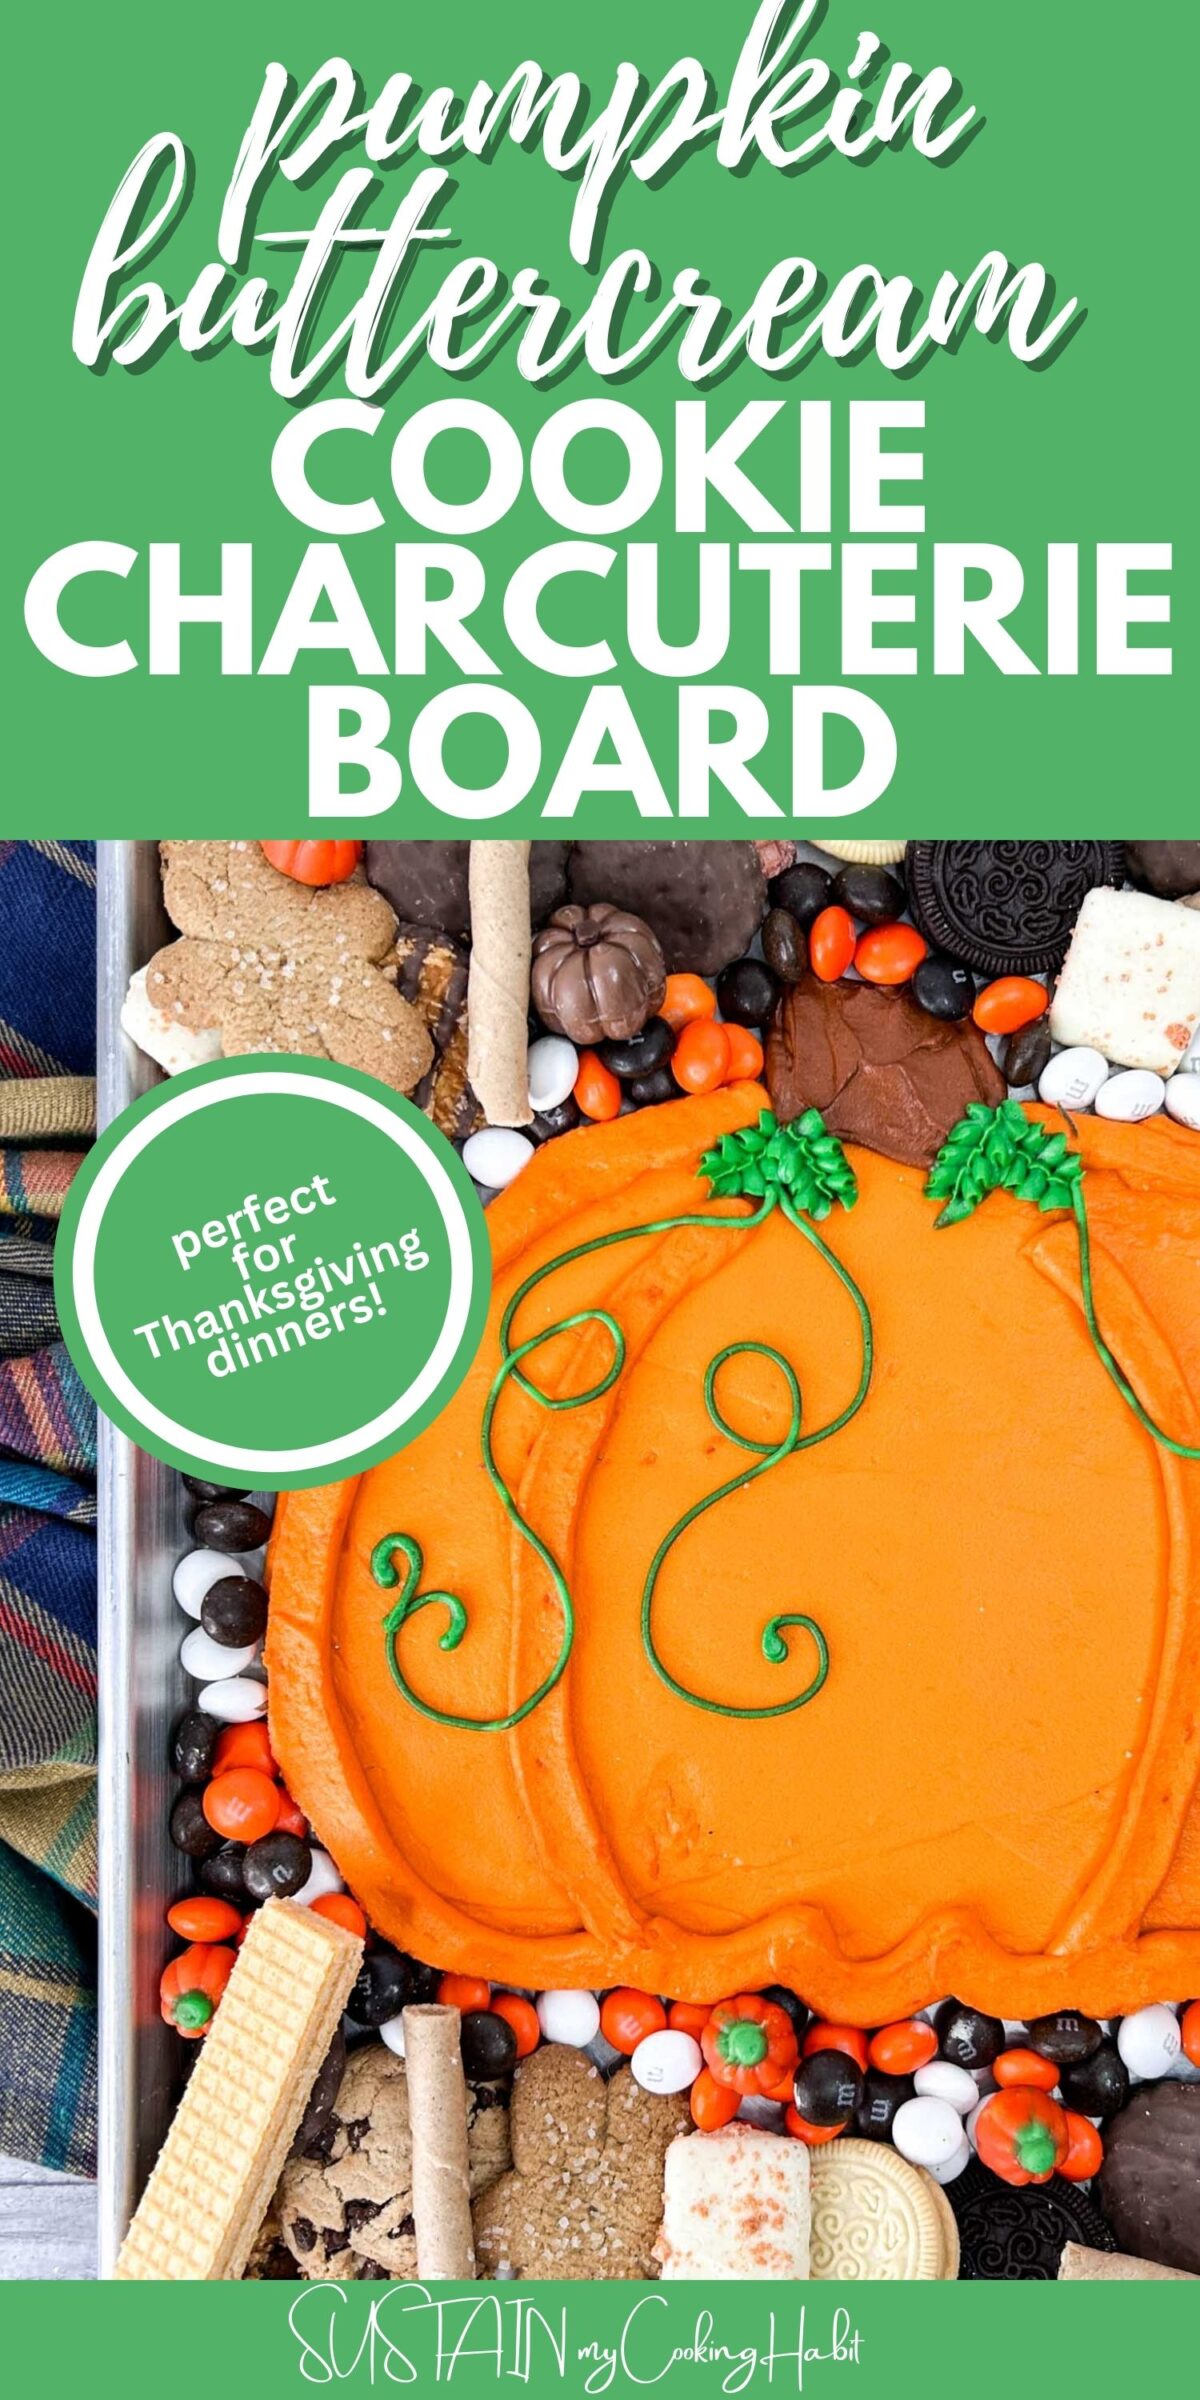 Pumpkin shaped buttercream cookie charcuterie board with text overlay.